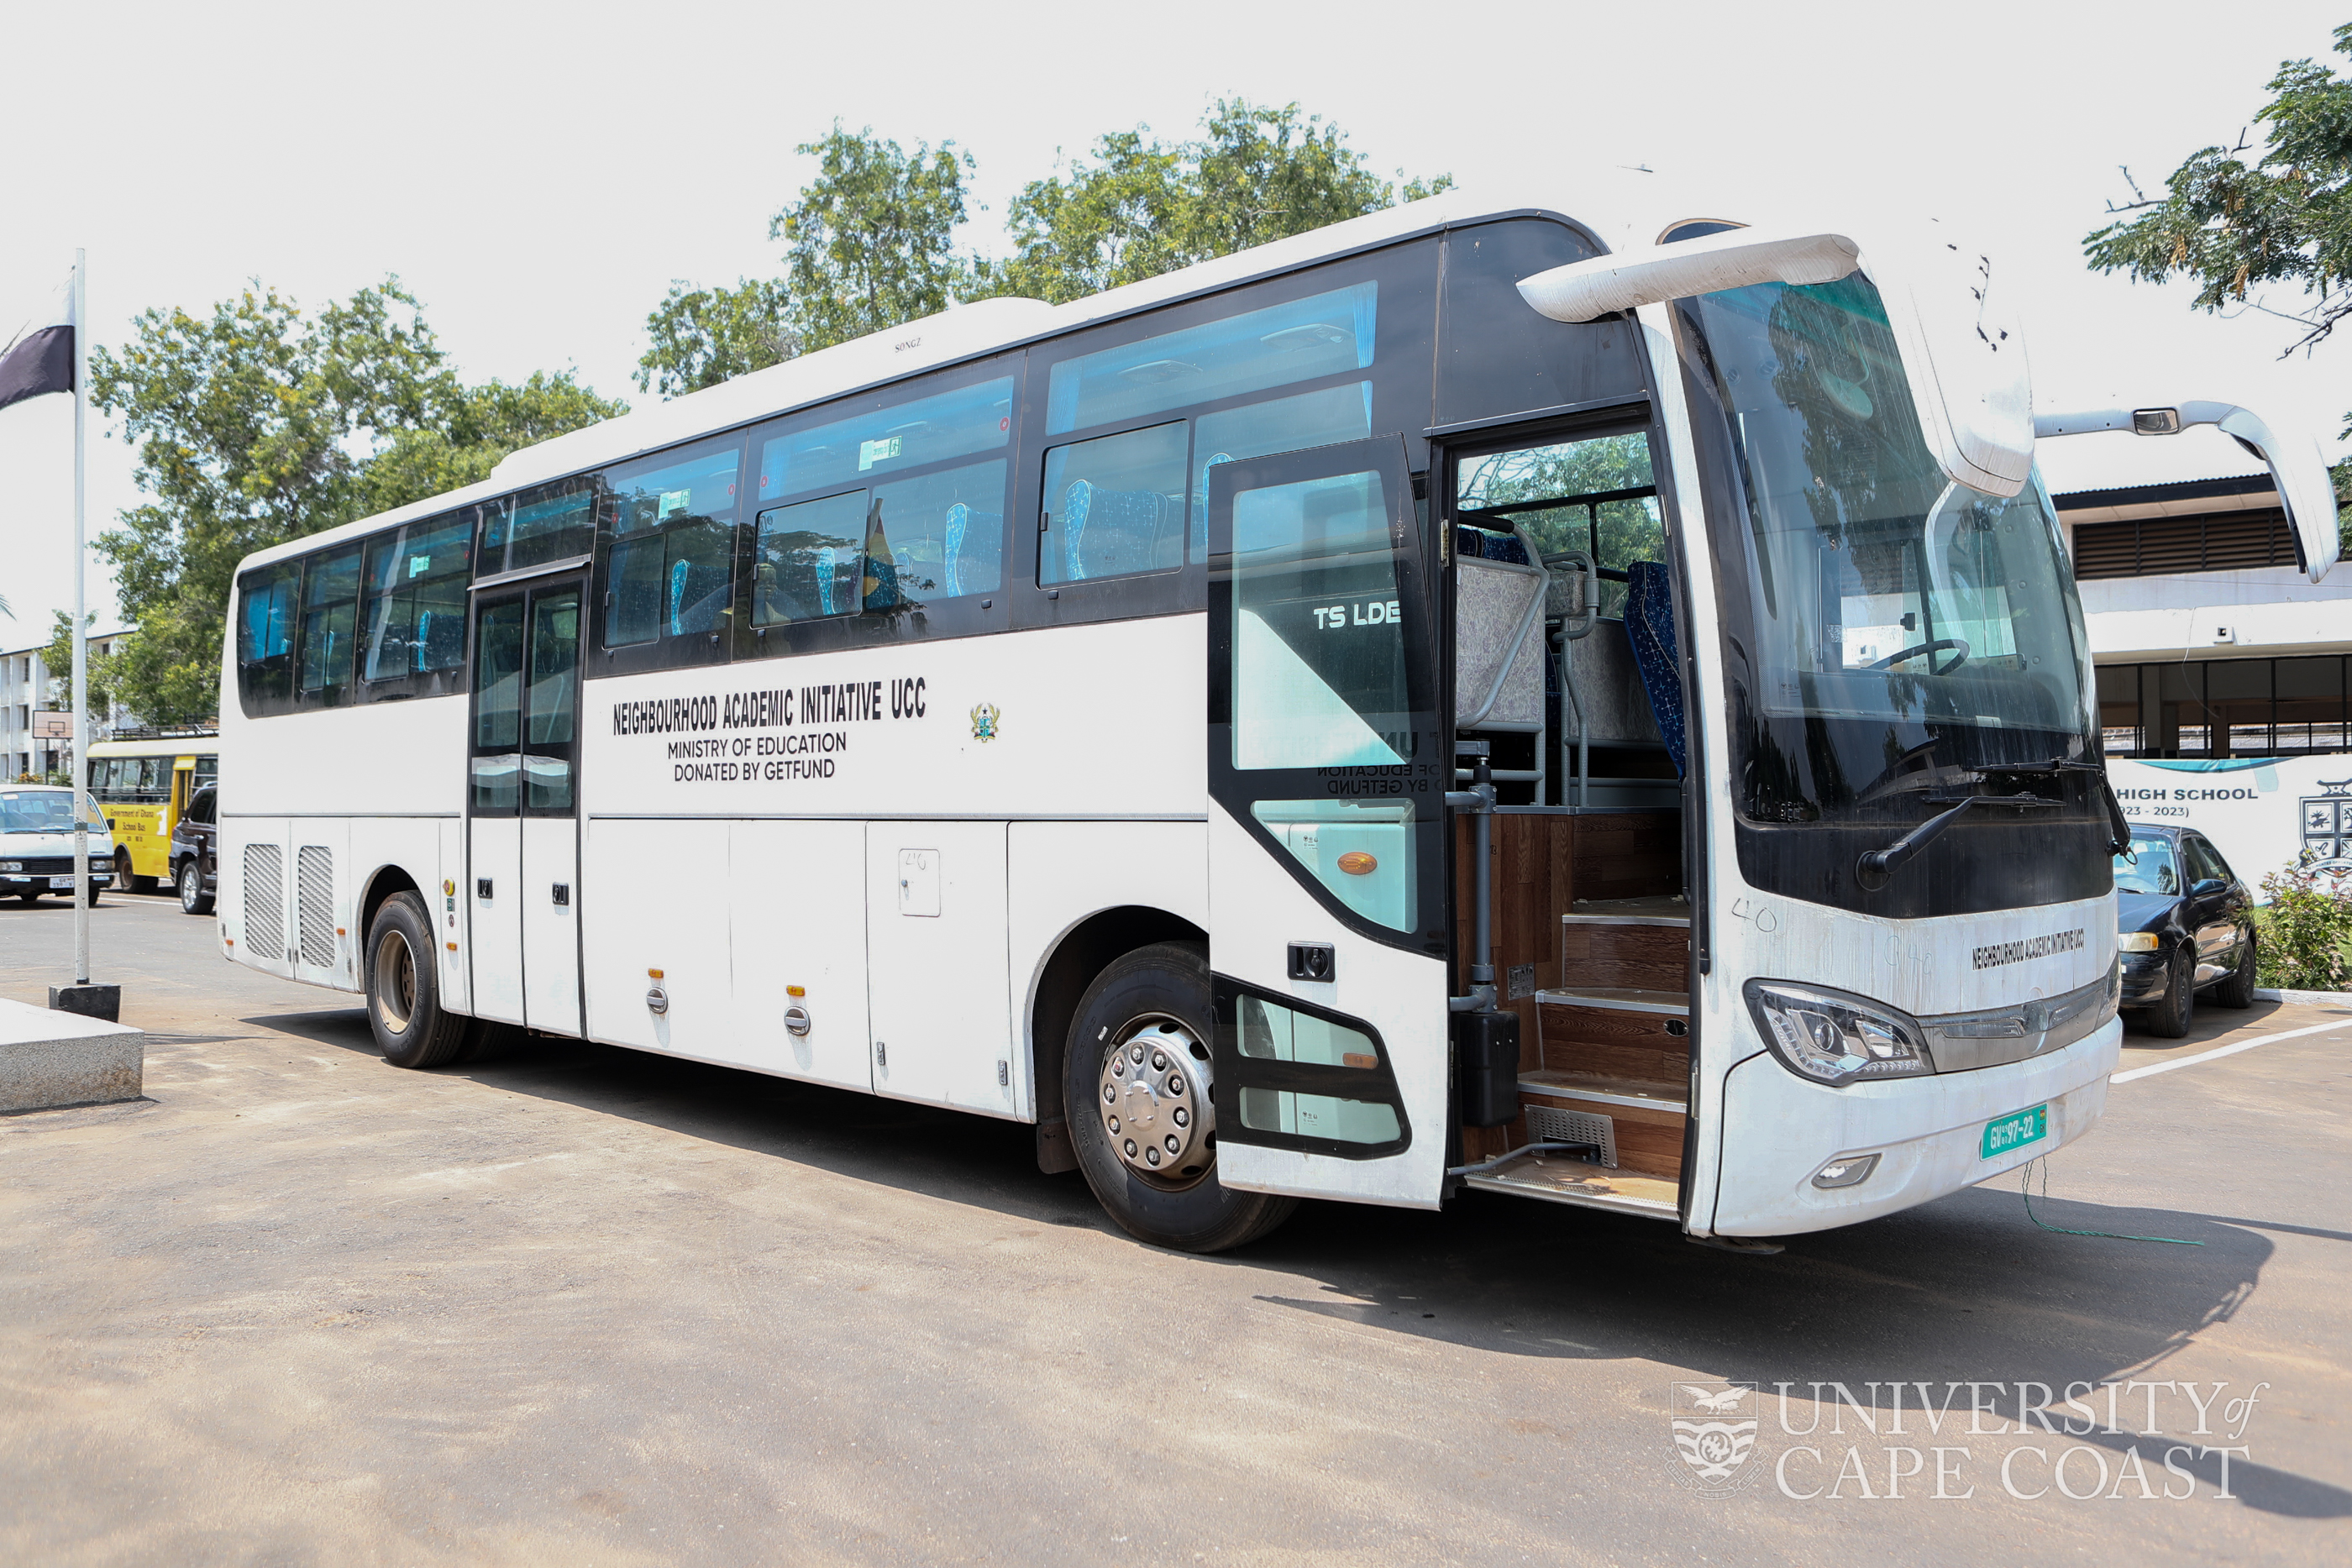 The UCC Neighbourhood Academic Initiative bus donated by the Minister of Education 